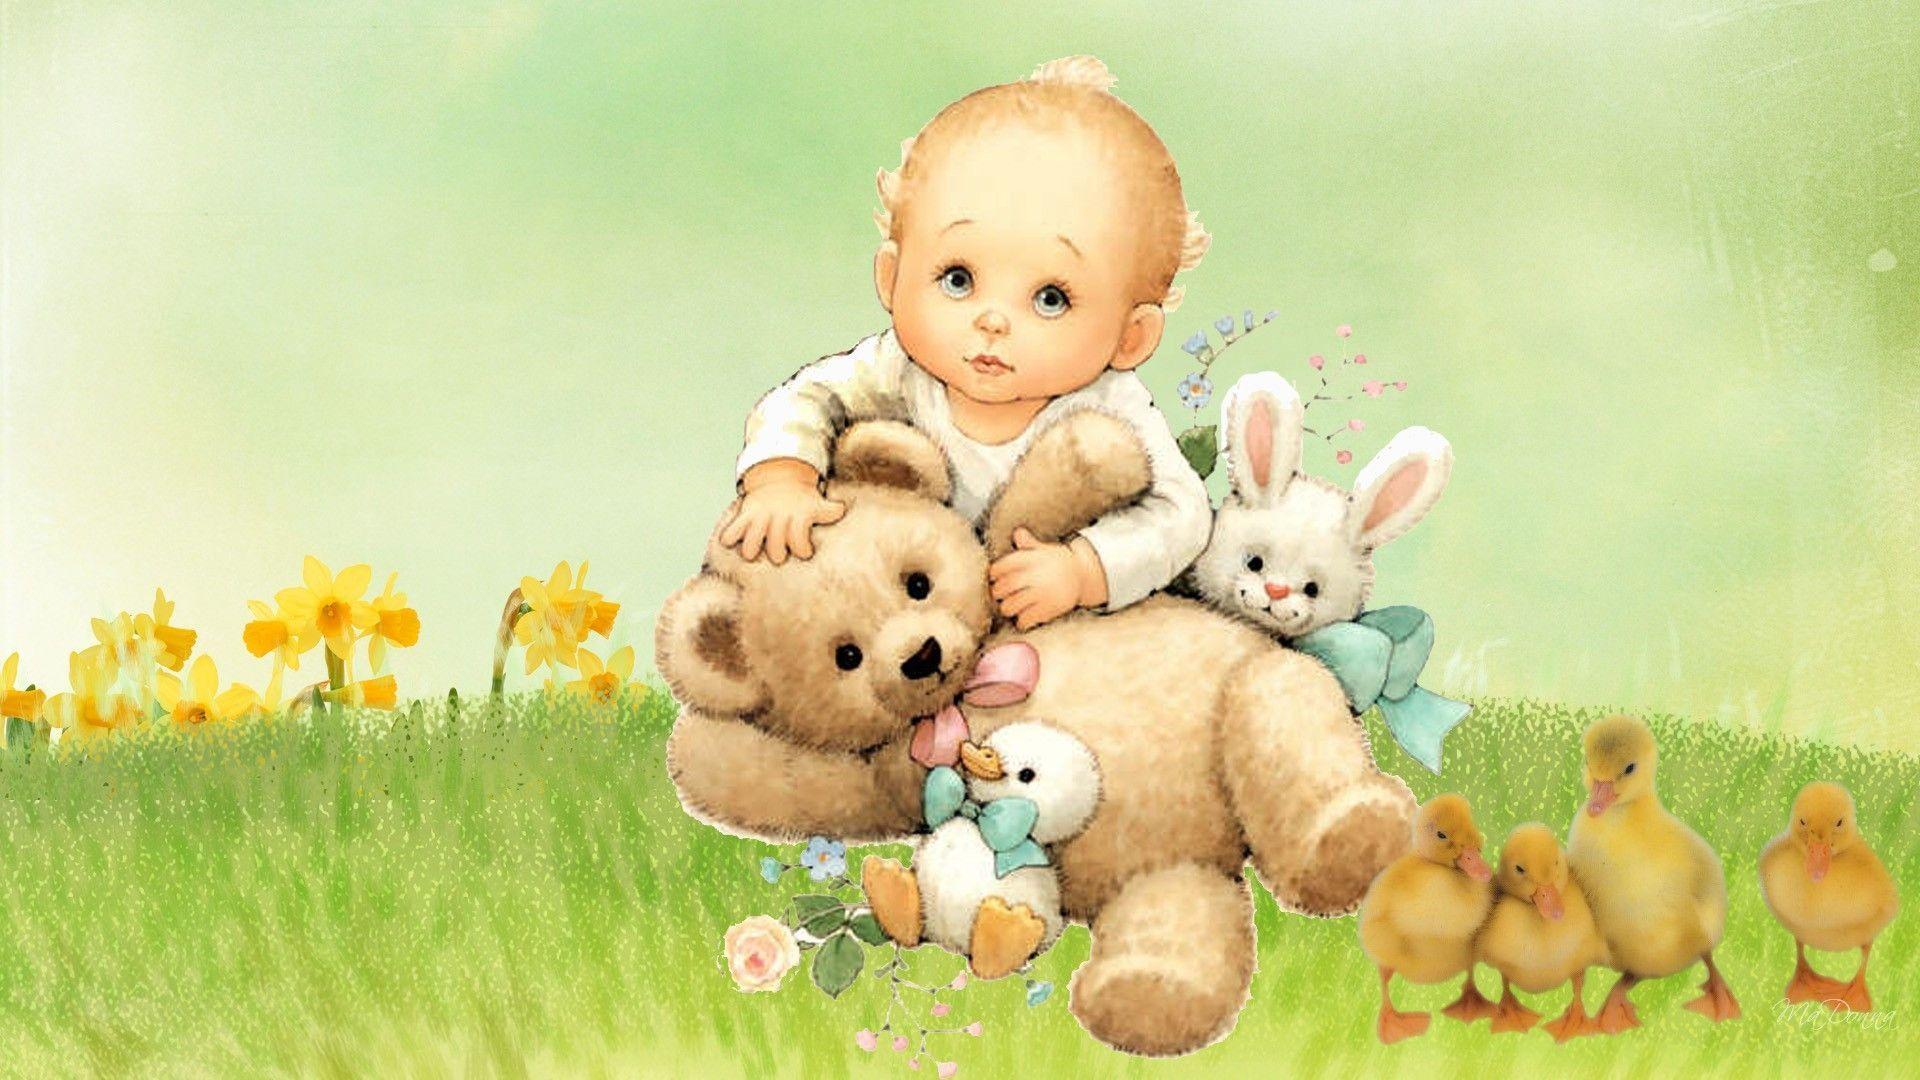 Love His Teddy Bear : Desktop and mobile wallpapers : Wallippo